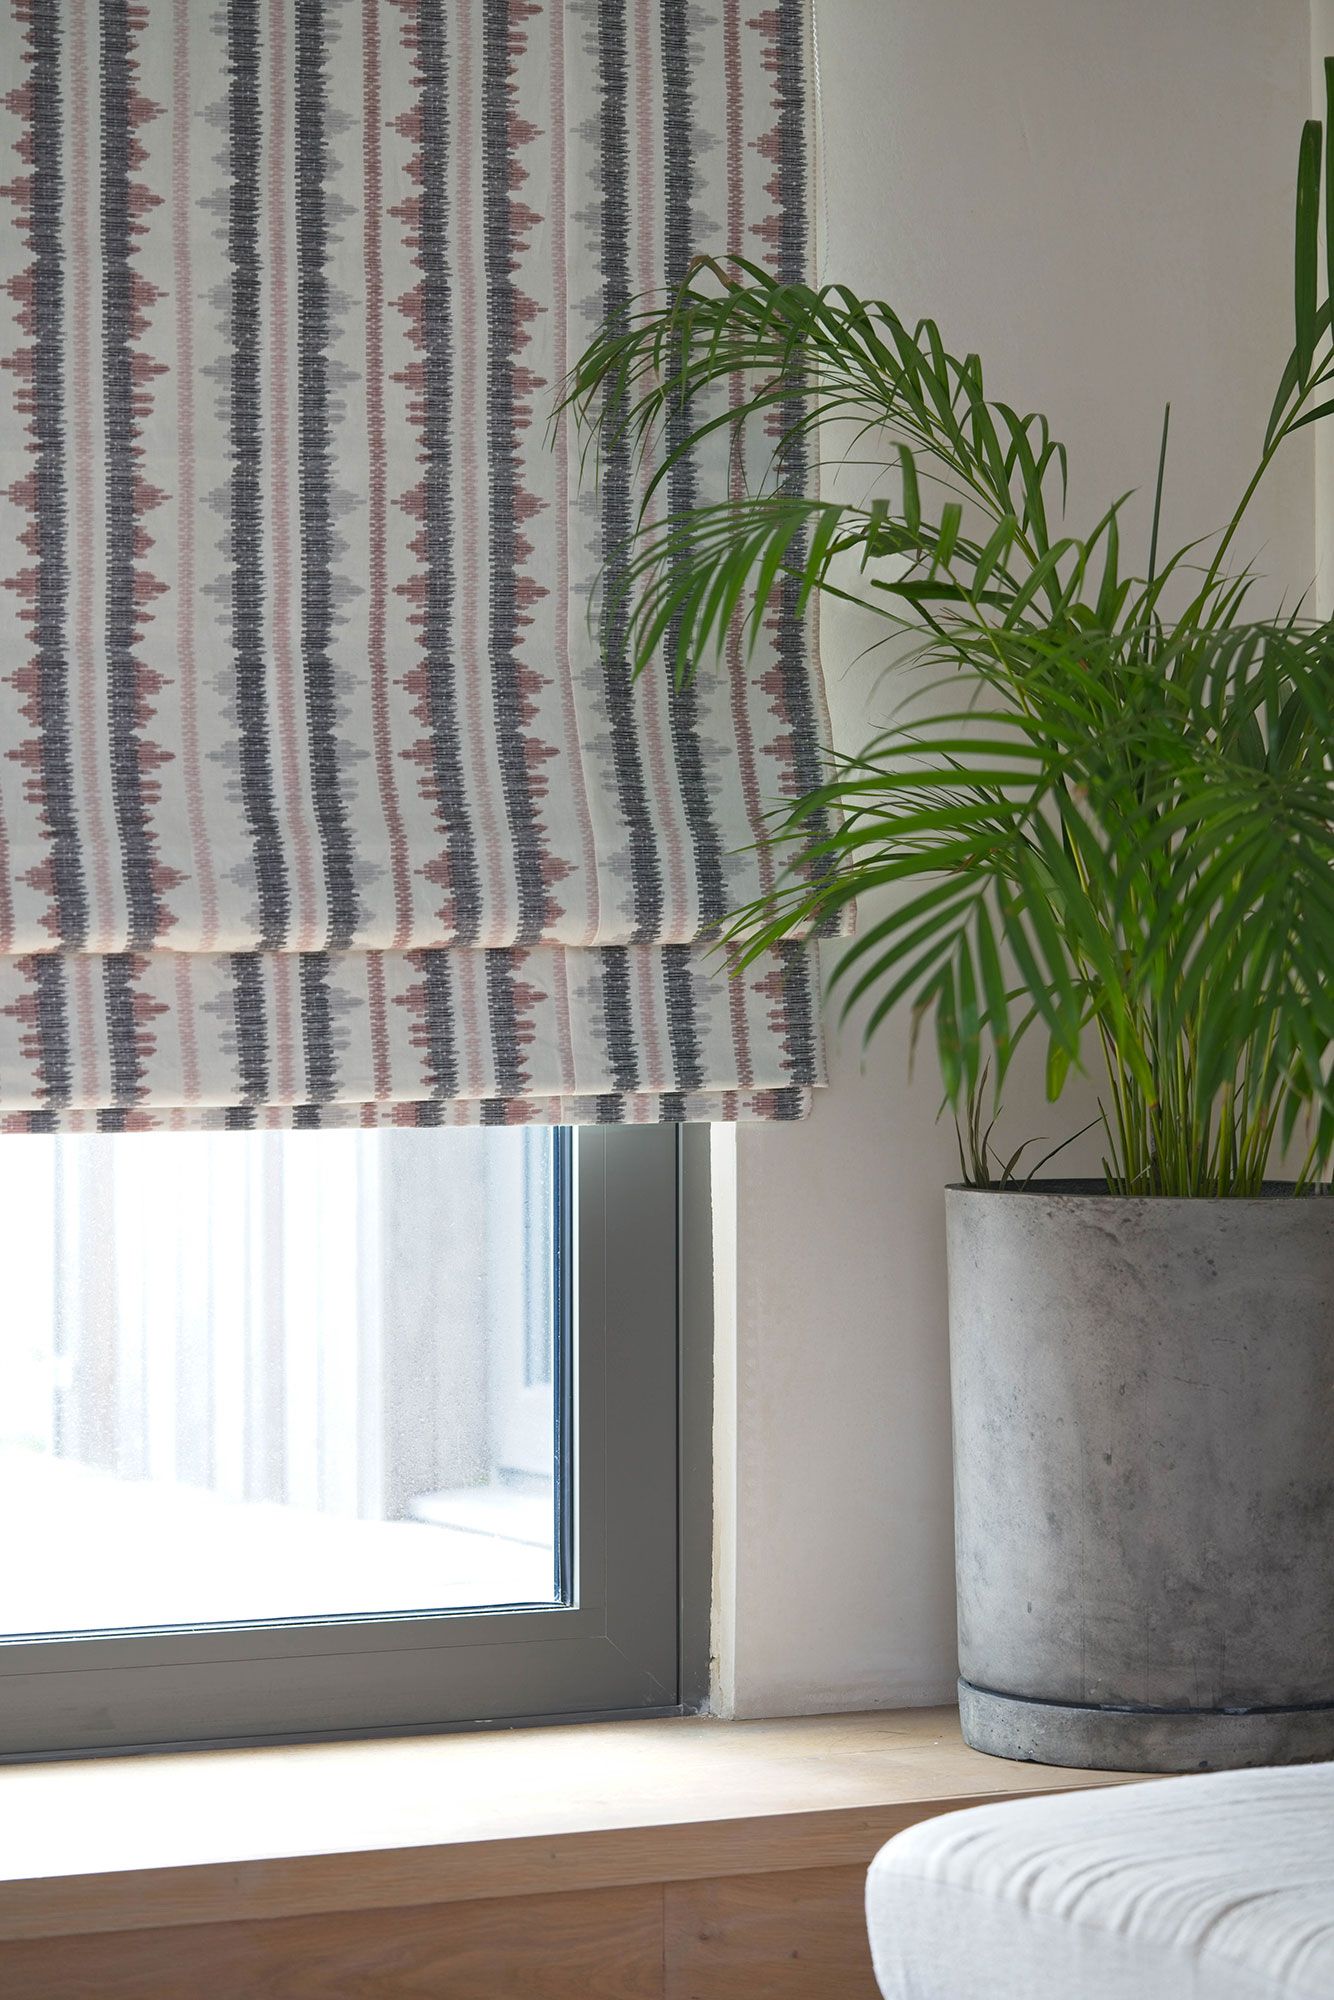 Grey Mono Striped Patterned Roman Blind Made To Measure In The UK Blackout 